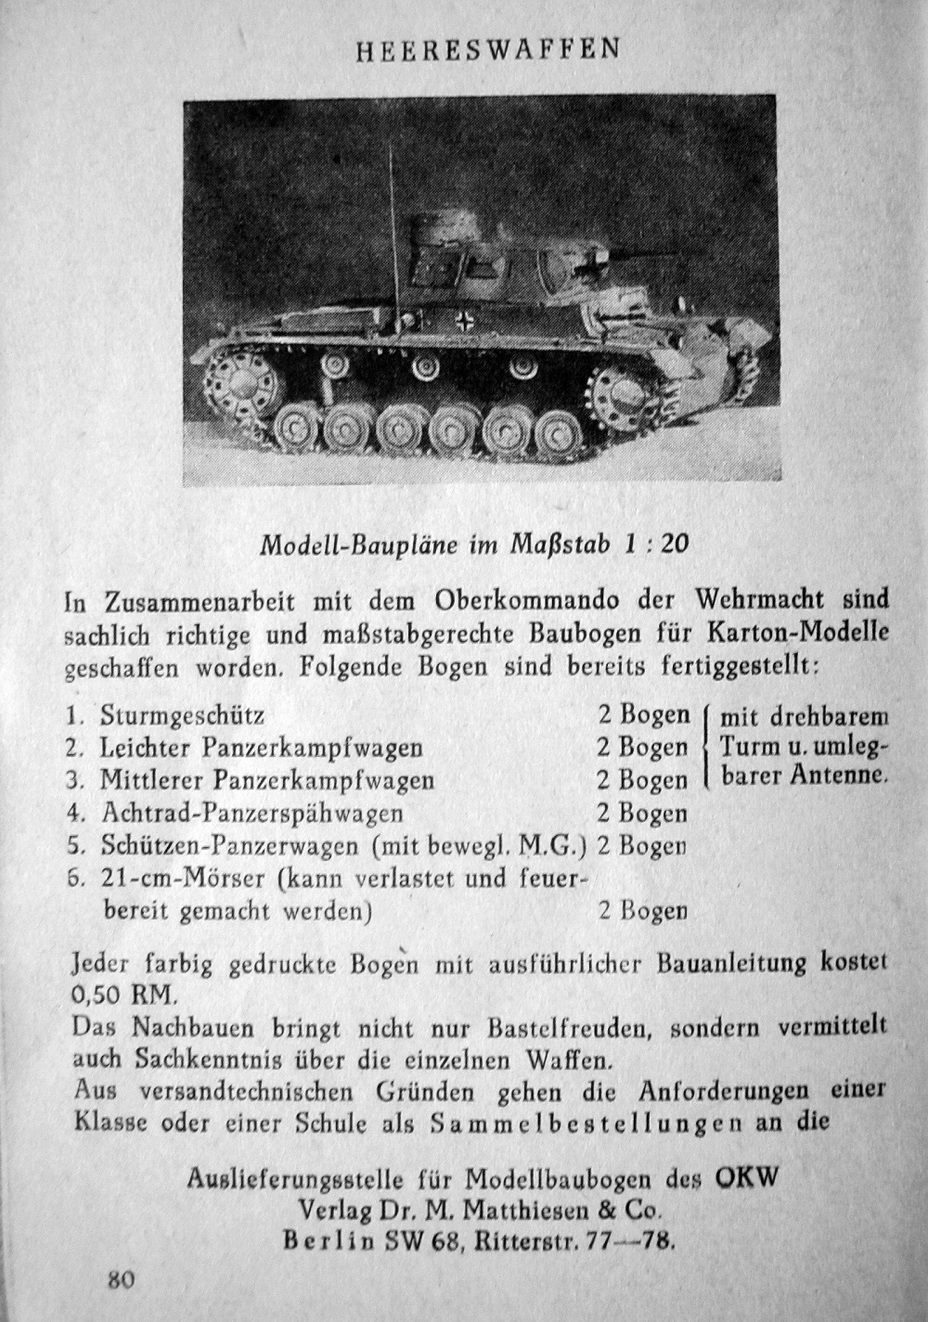 ​A German Pz.Kpfw.III Ausf.F model produced by Dr. M. Matthiesen & Co. KG. The illustration is from a German wartime reference book - Weaponized Carboard | Warspot.net